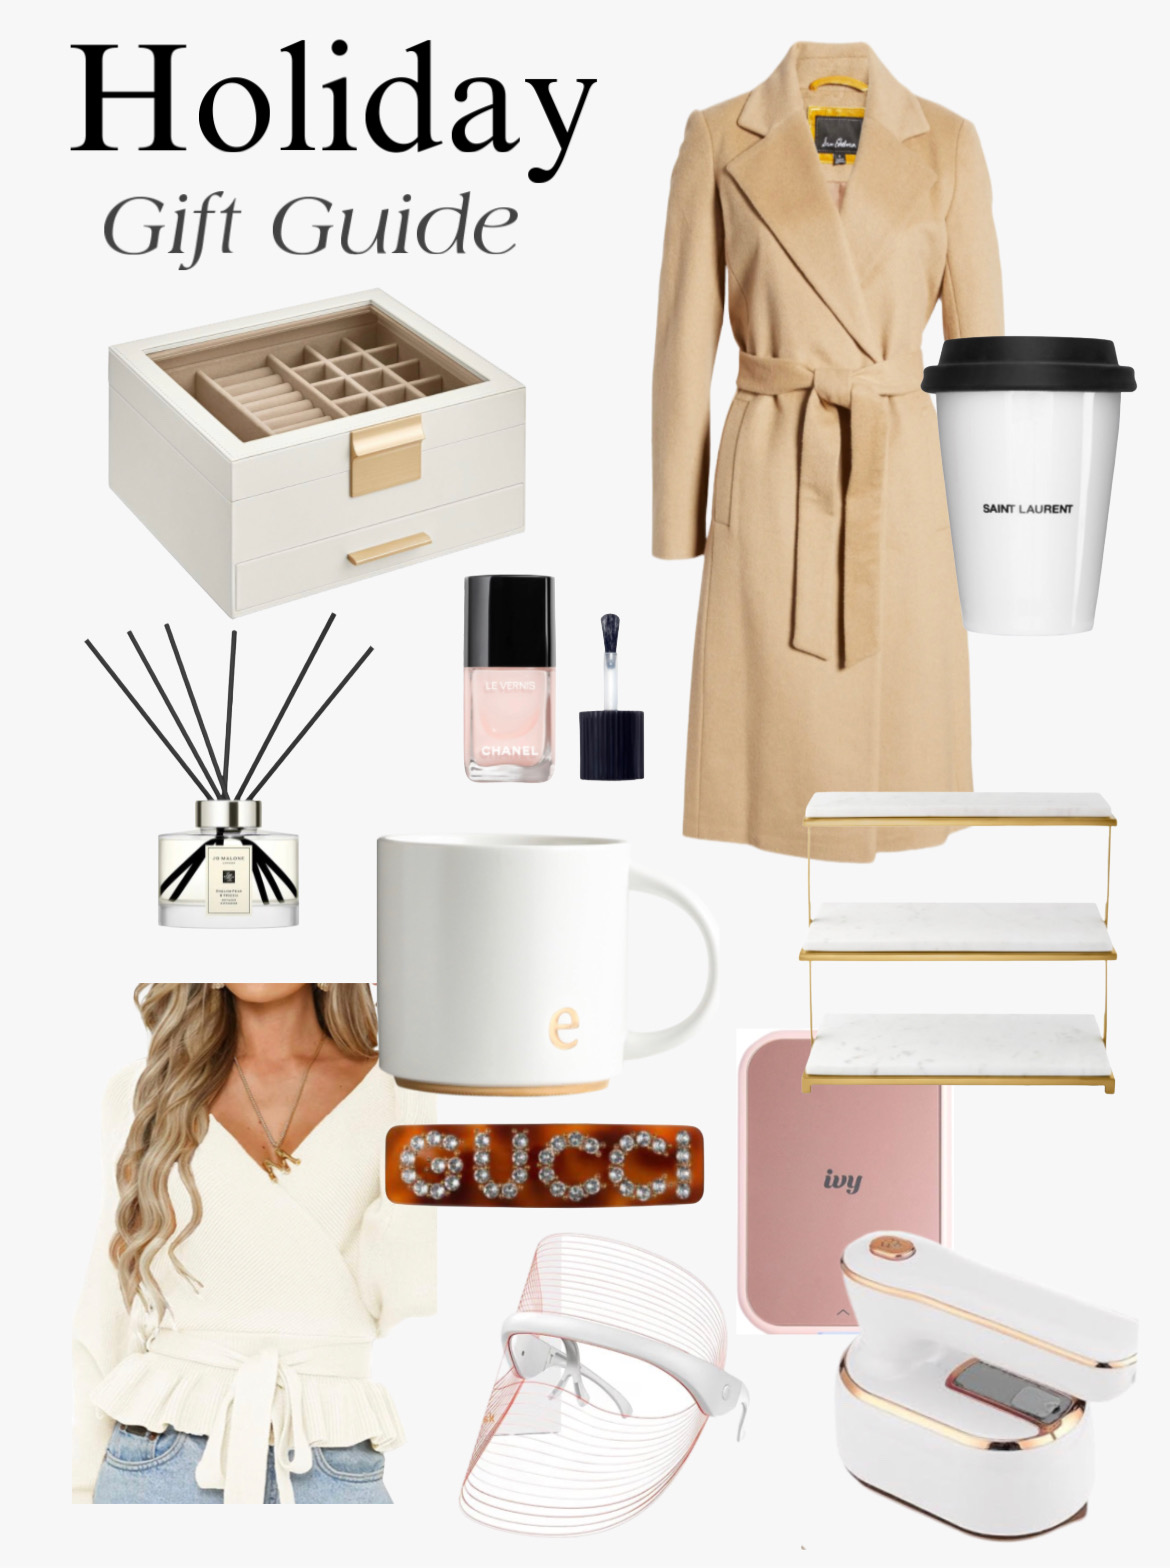 20 GIFT IDEAS FOR THE WOMEN THAT HAS IT ALL – The Allure Edition